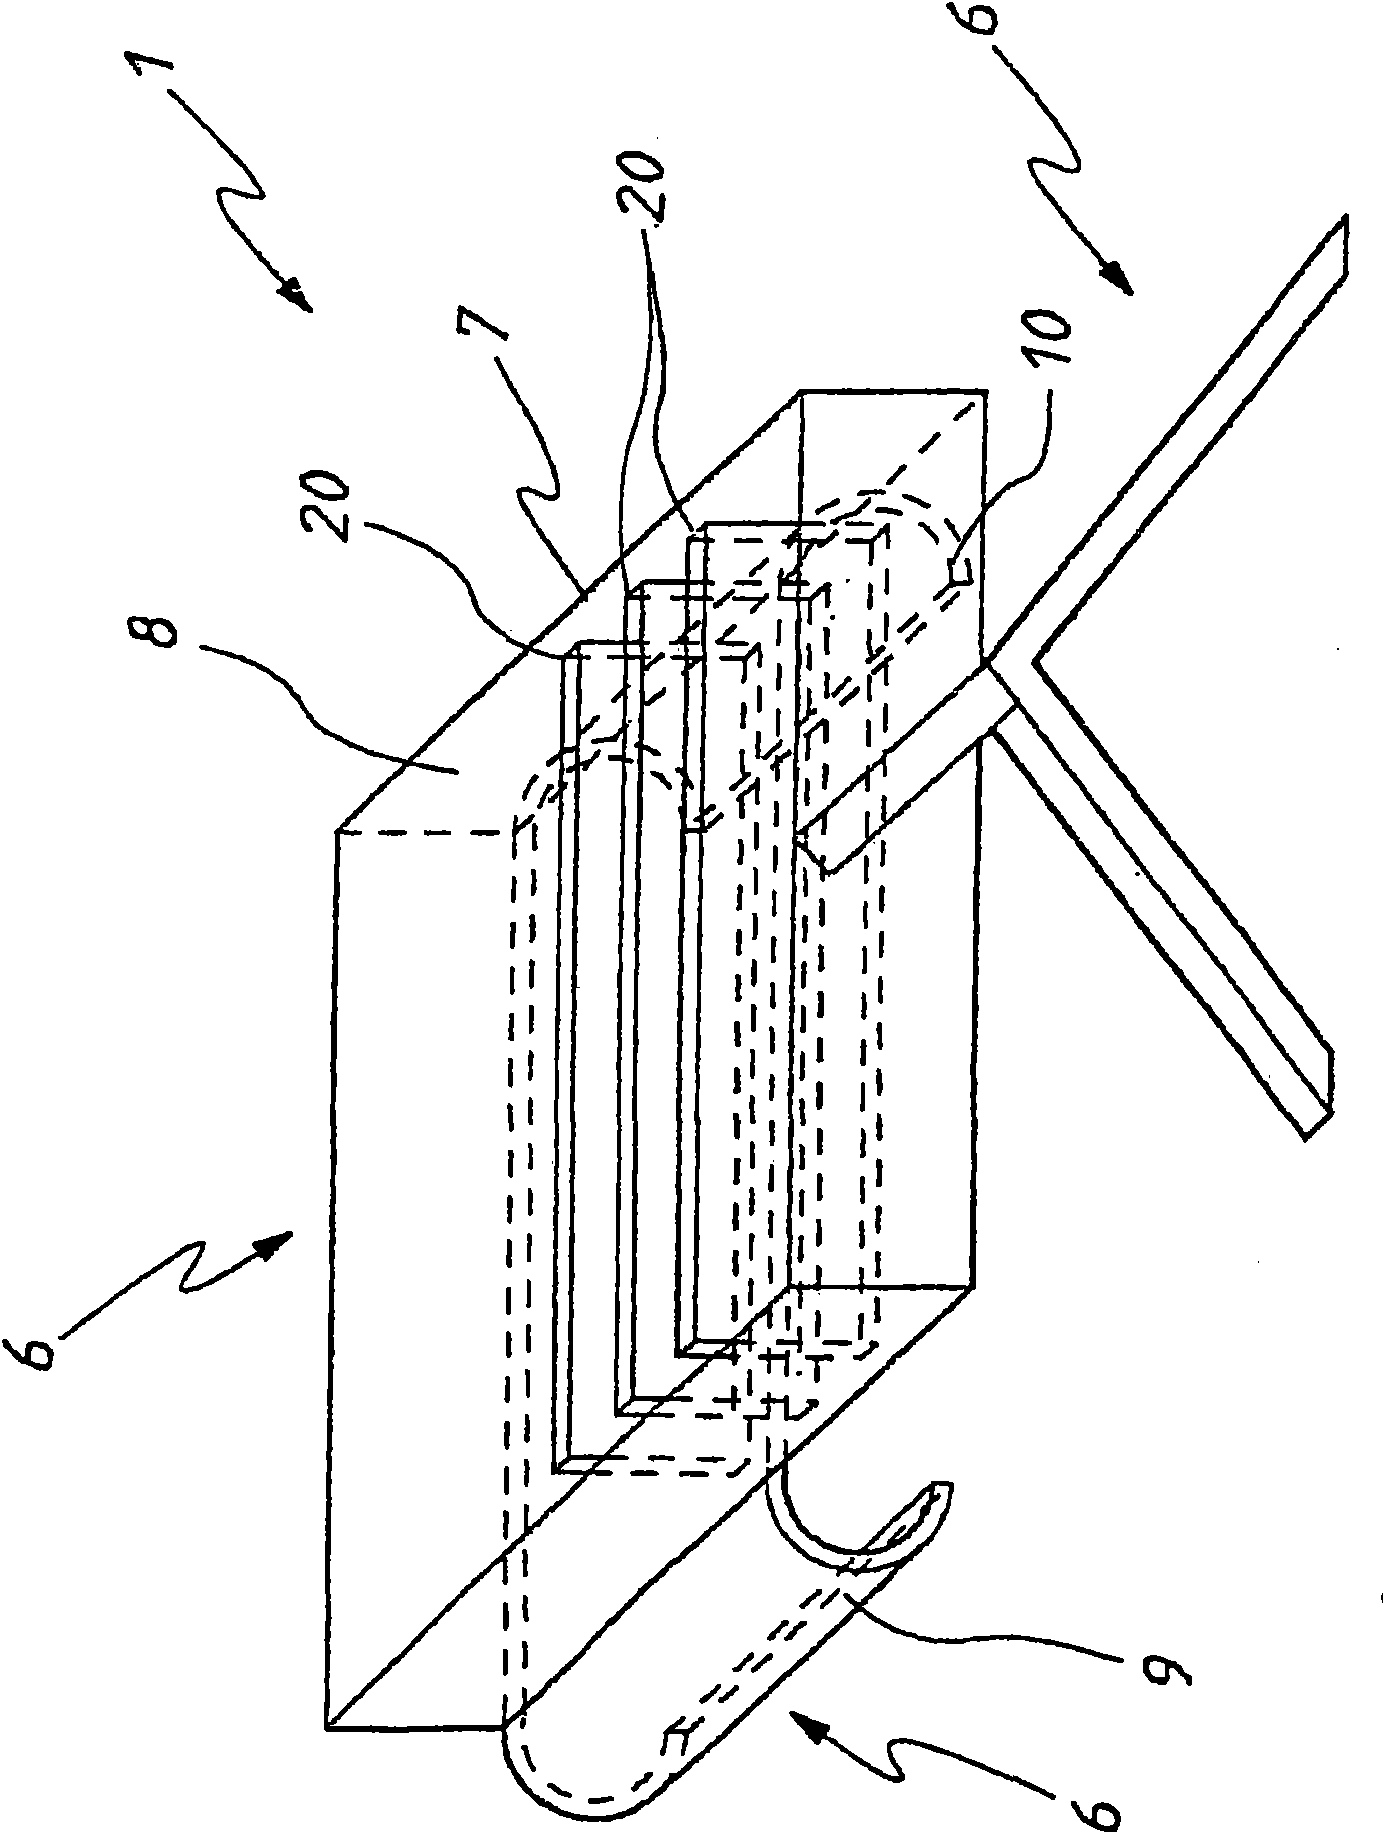 Apparatus and methods for bone surgery